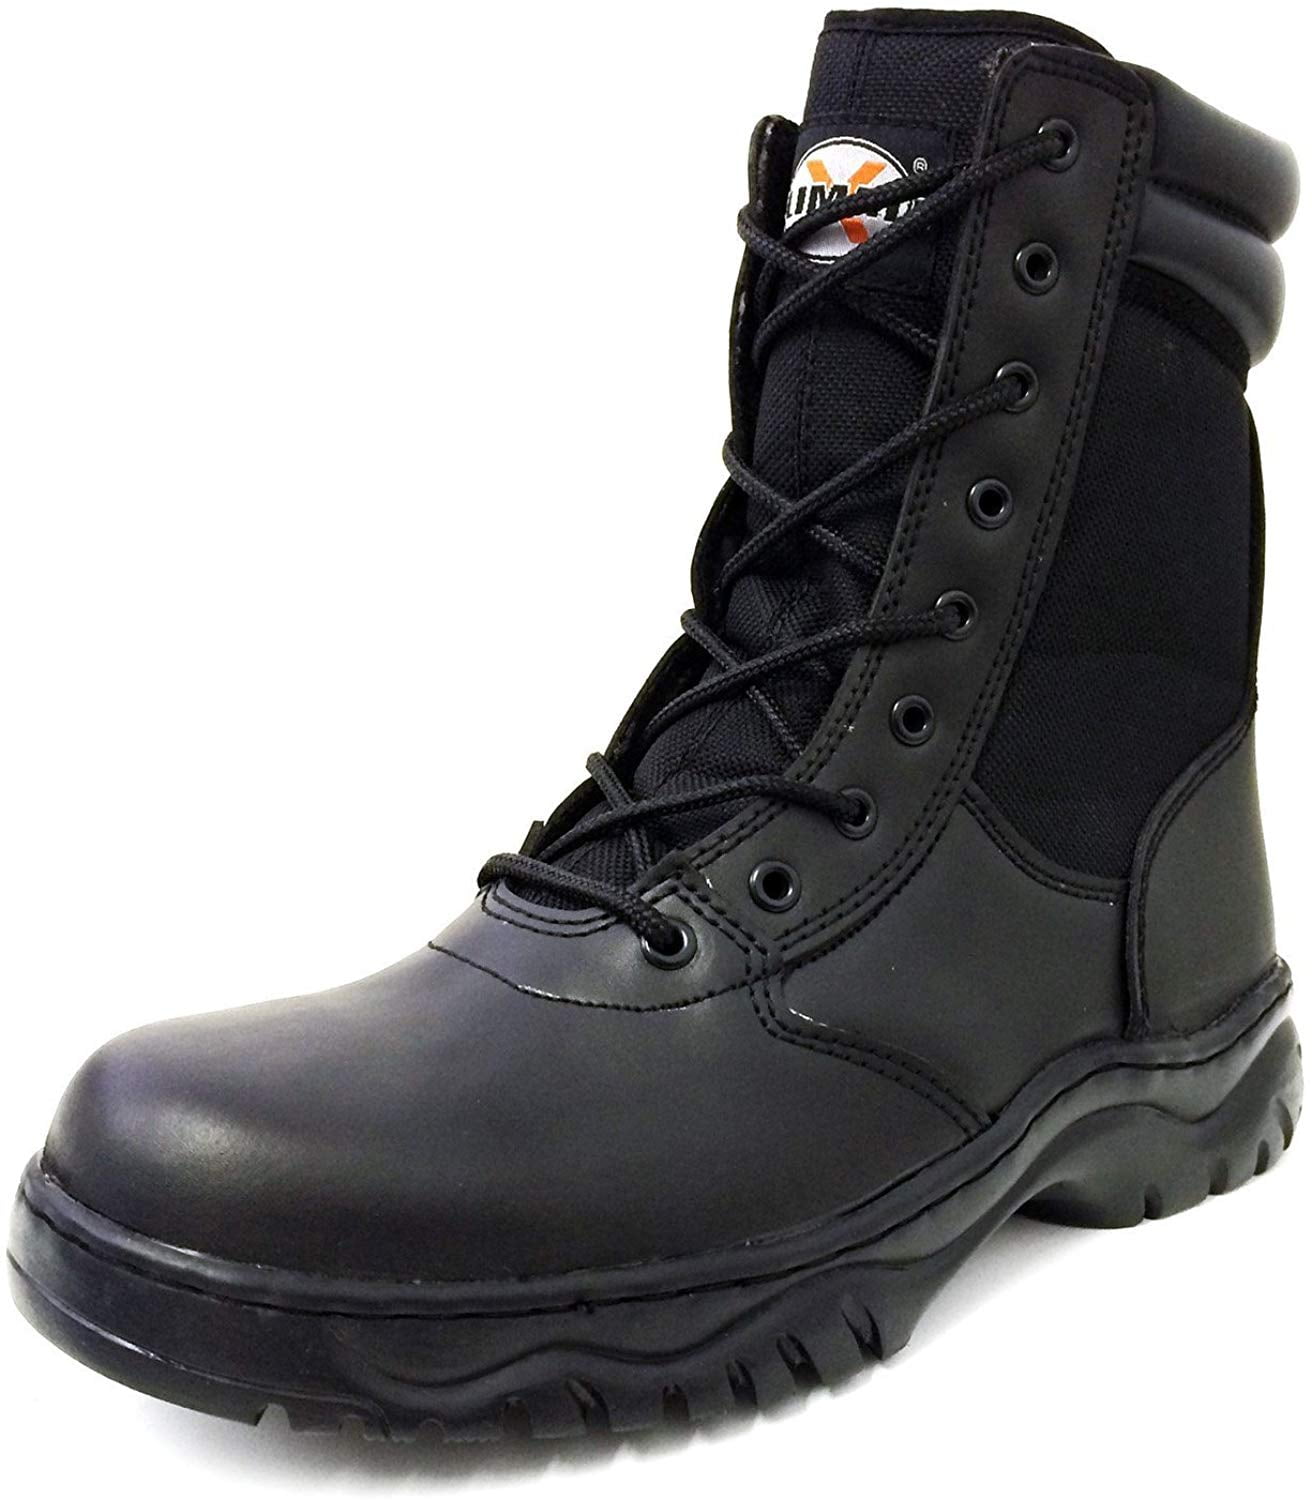 Men's Leather Military Combat Safety Tactical Boots Steel Toe Duty Work Shoes 